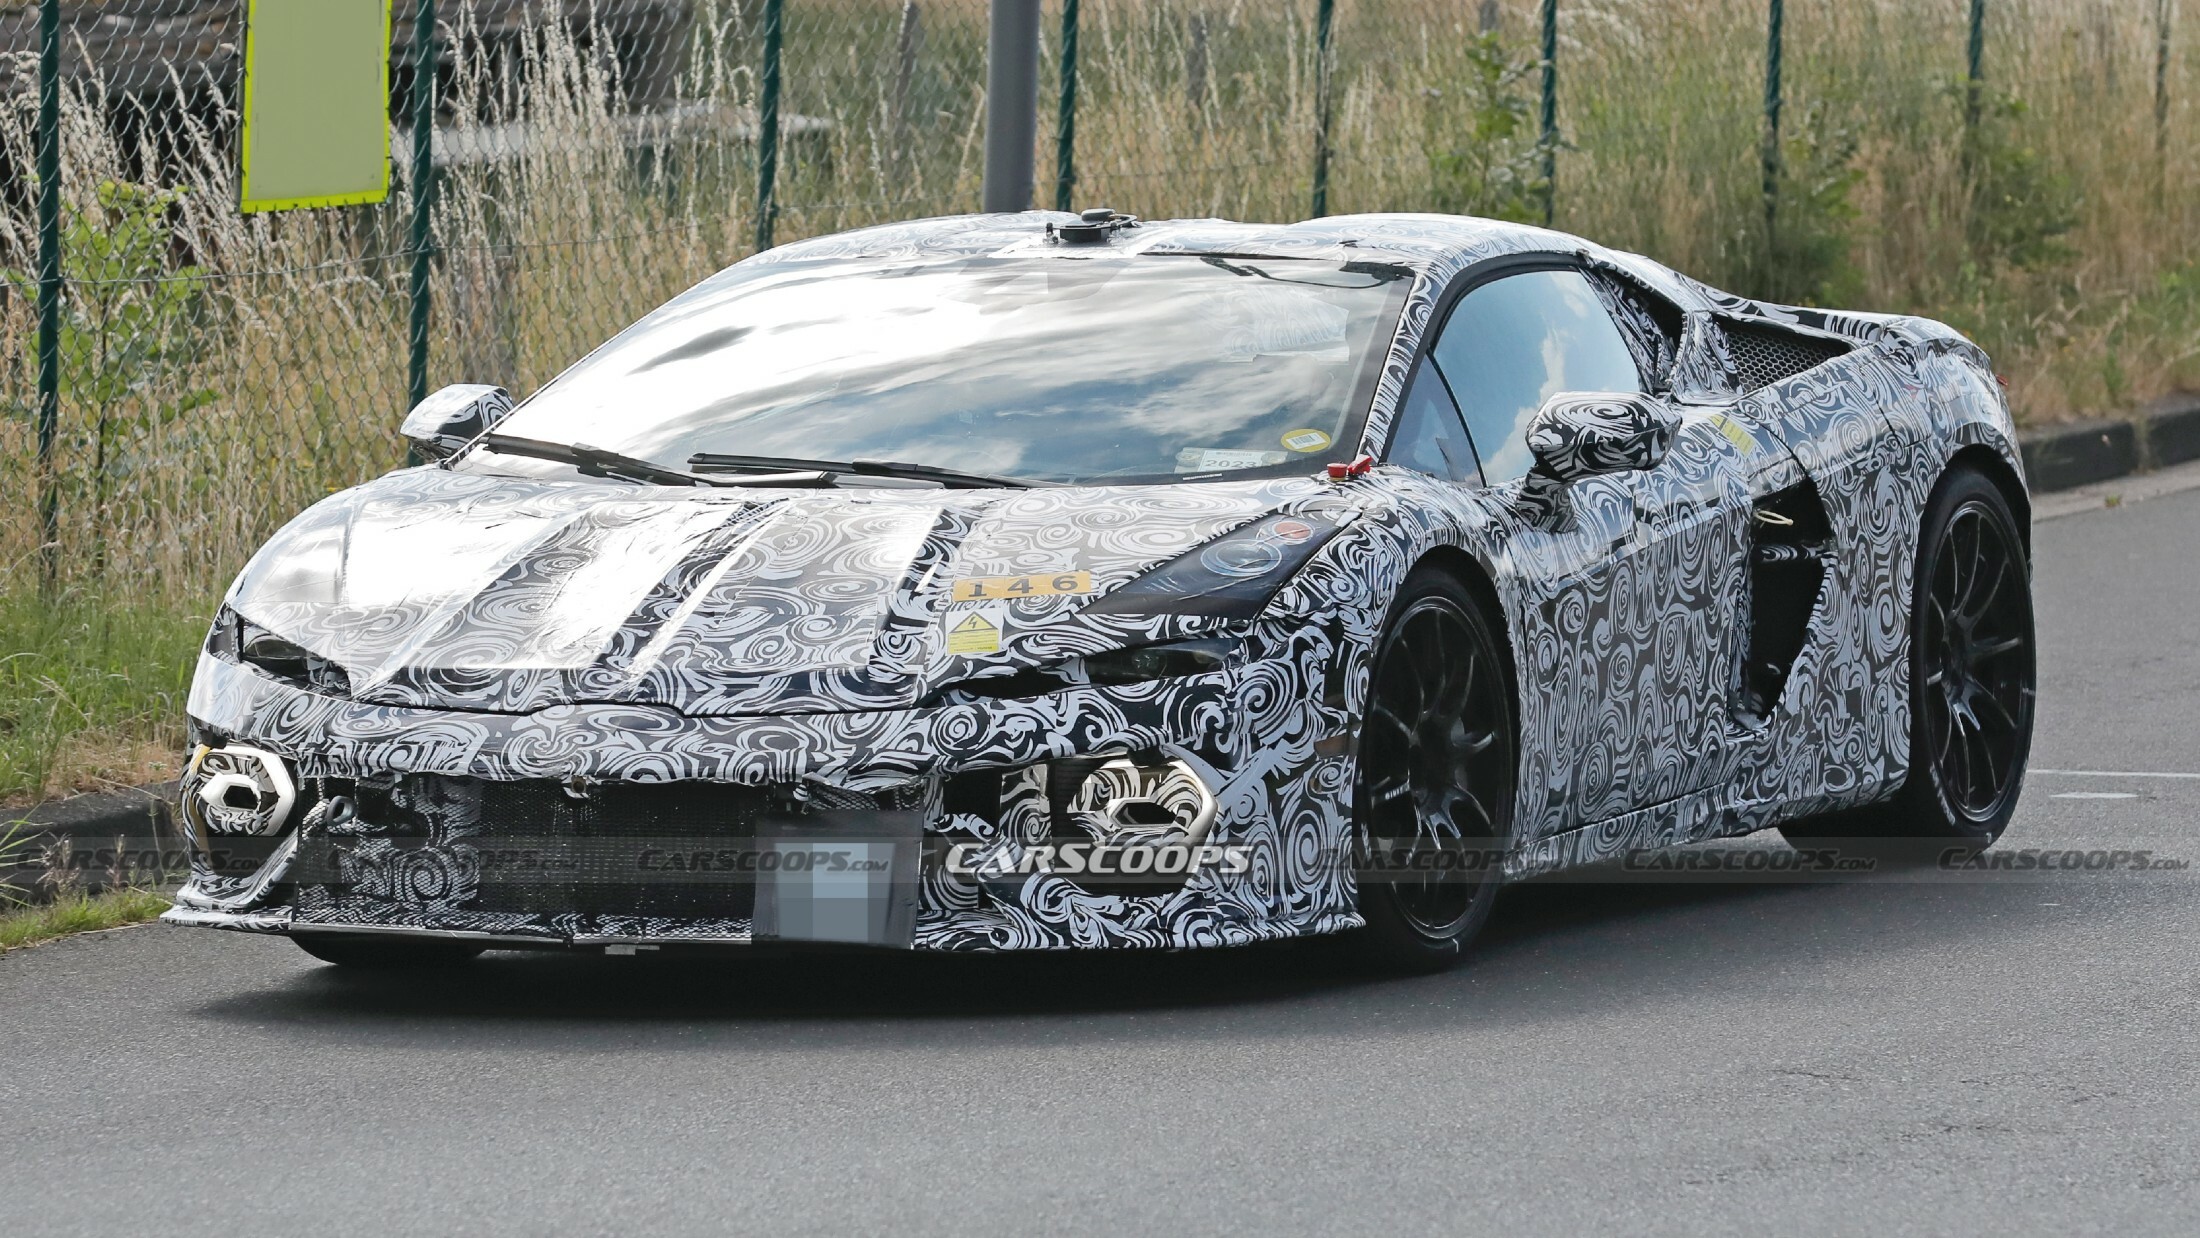 Lamborghini Huracan Successor Spied With Edgy Styling And Hybrid